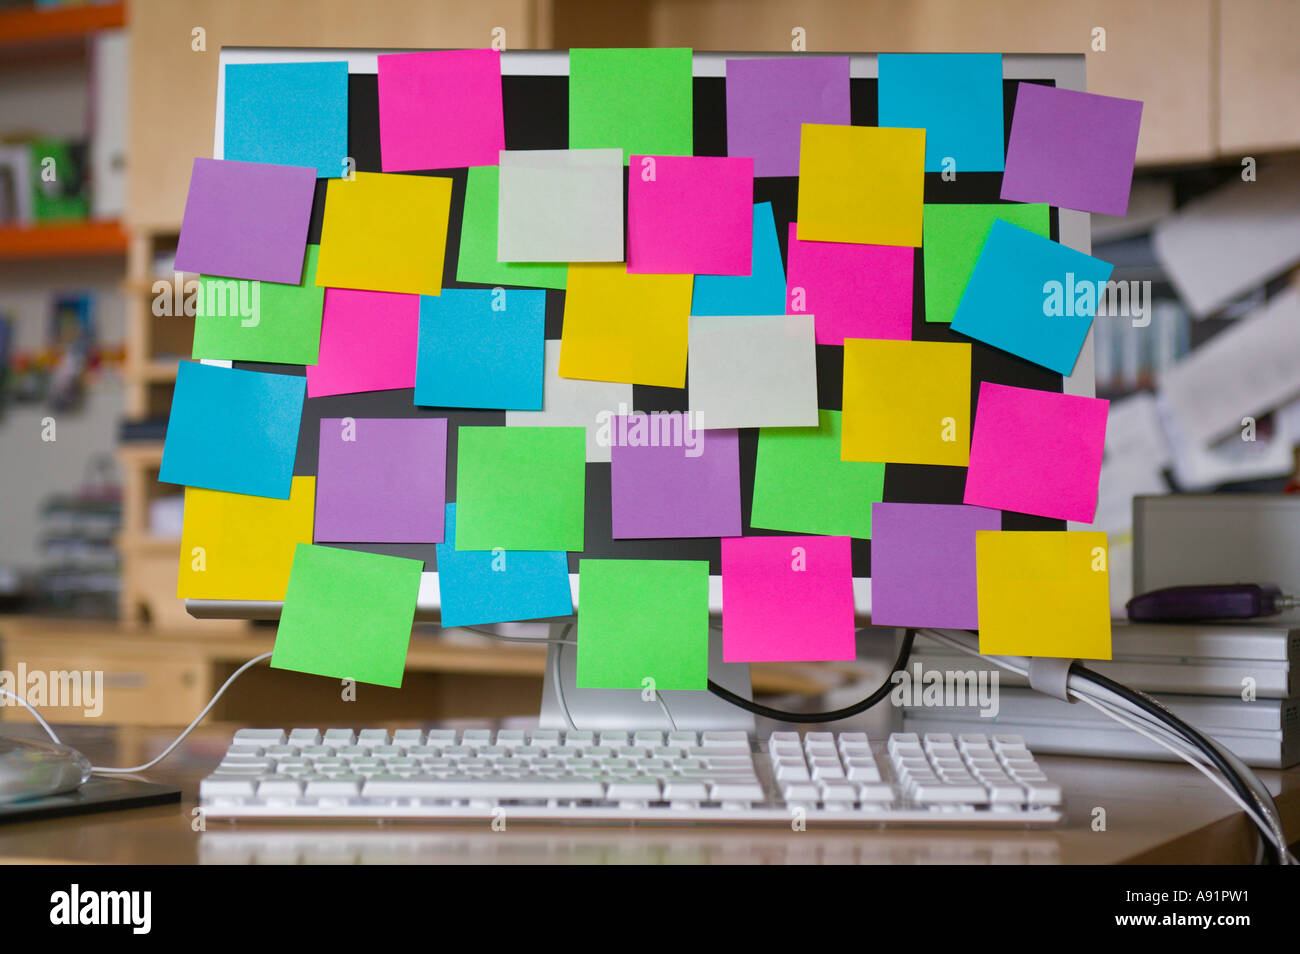 Post It Notes on Computer Monitor Stock Photo